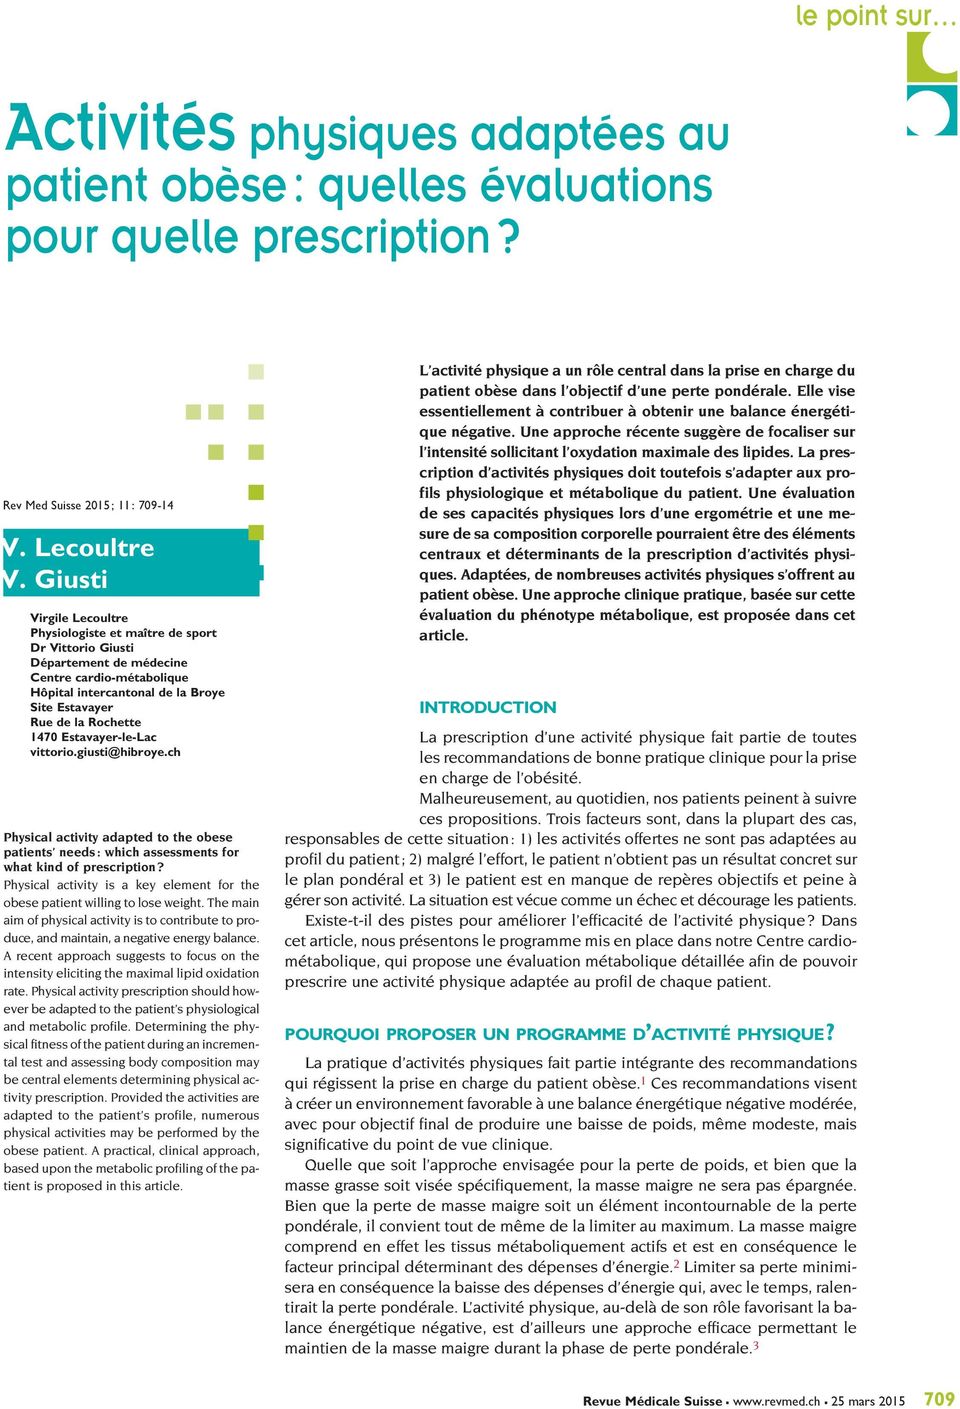 Estavayer-le-Lac vittorio.giusti@hibroye.ch Physical activity adapted to the obese patients needs : which assessments for what kind of prescription?